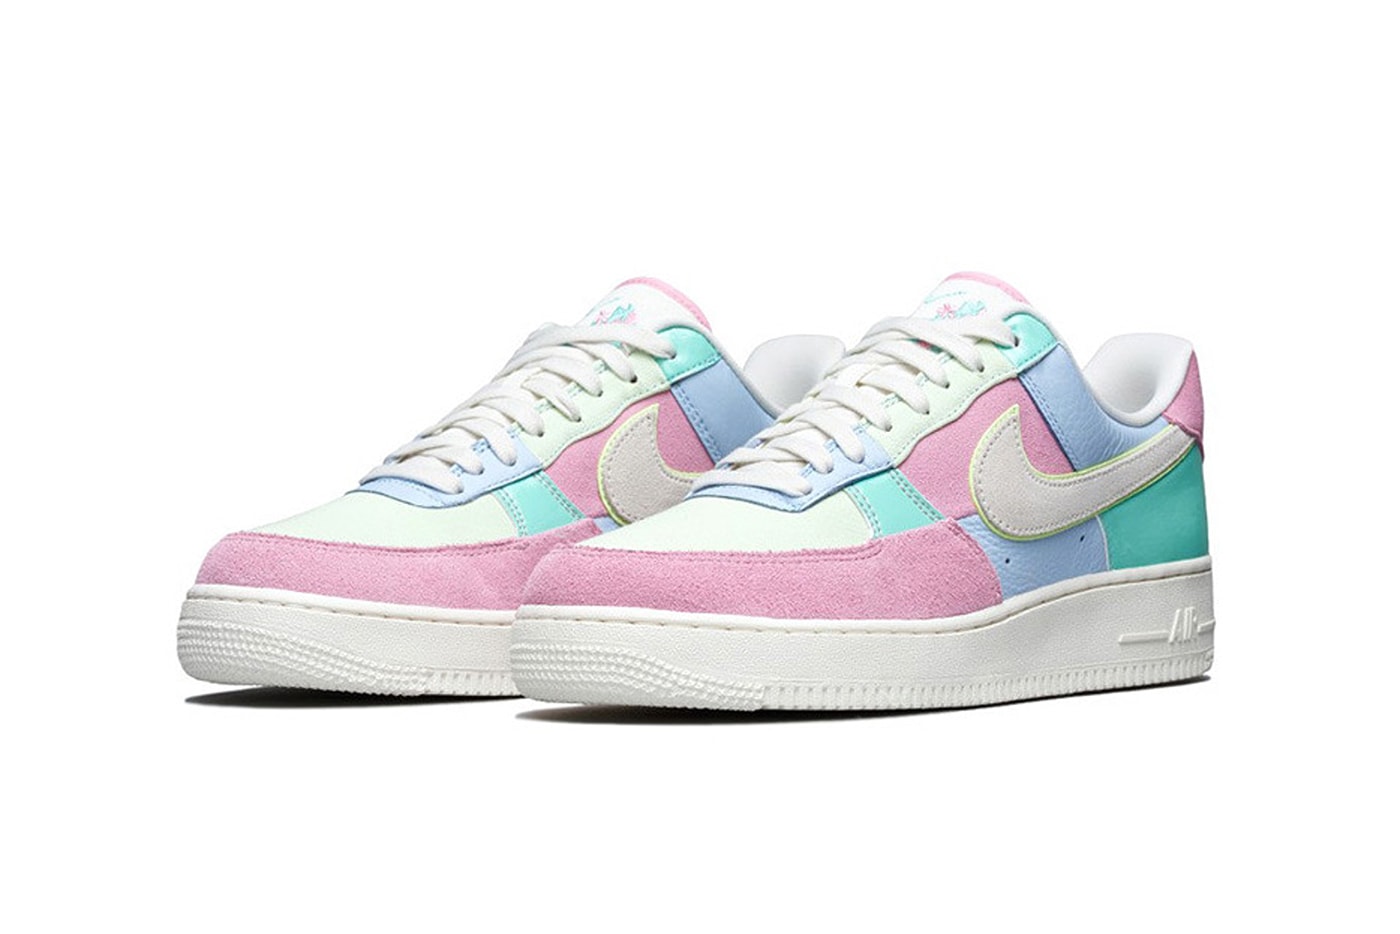 Nike Air Force 1 Low QS Easter release info Ice Blue Sail Hyper Turq Barely Volt sneakers